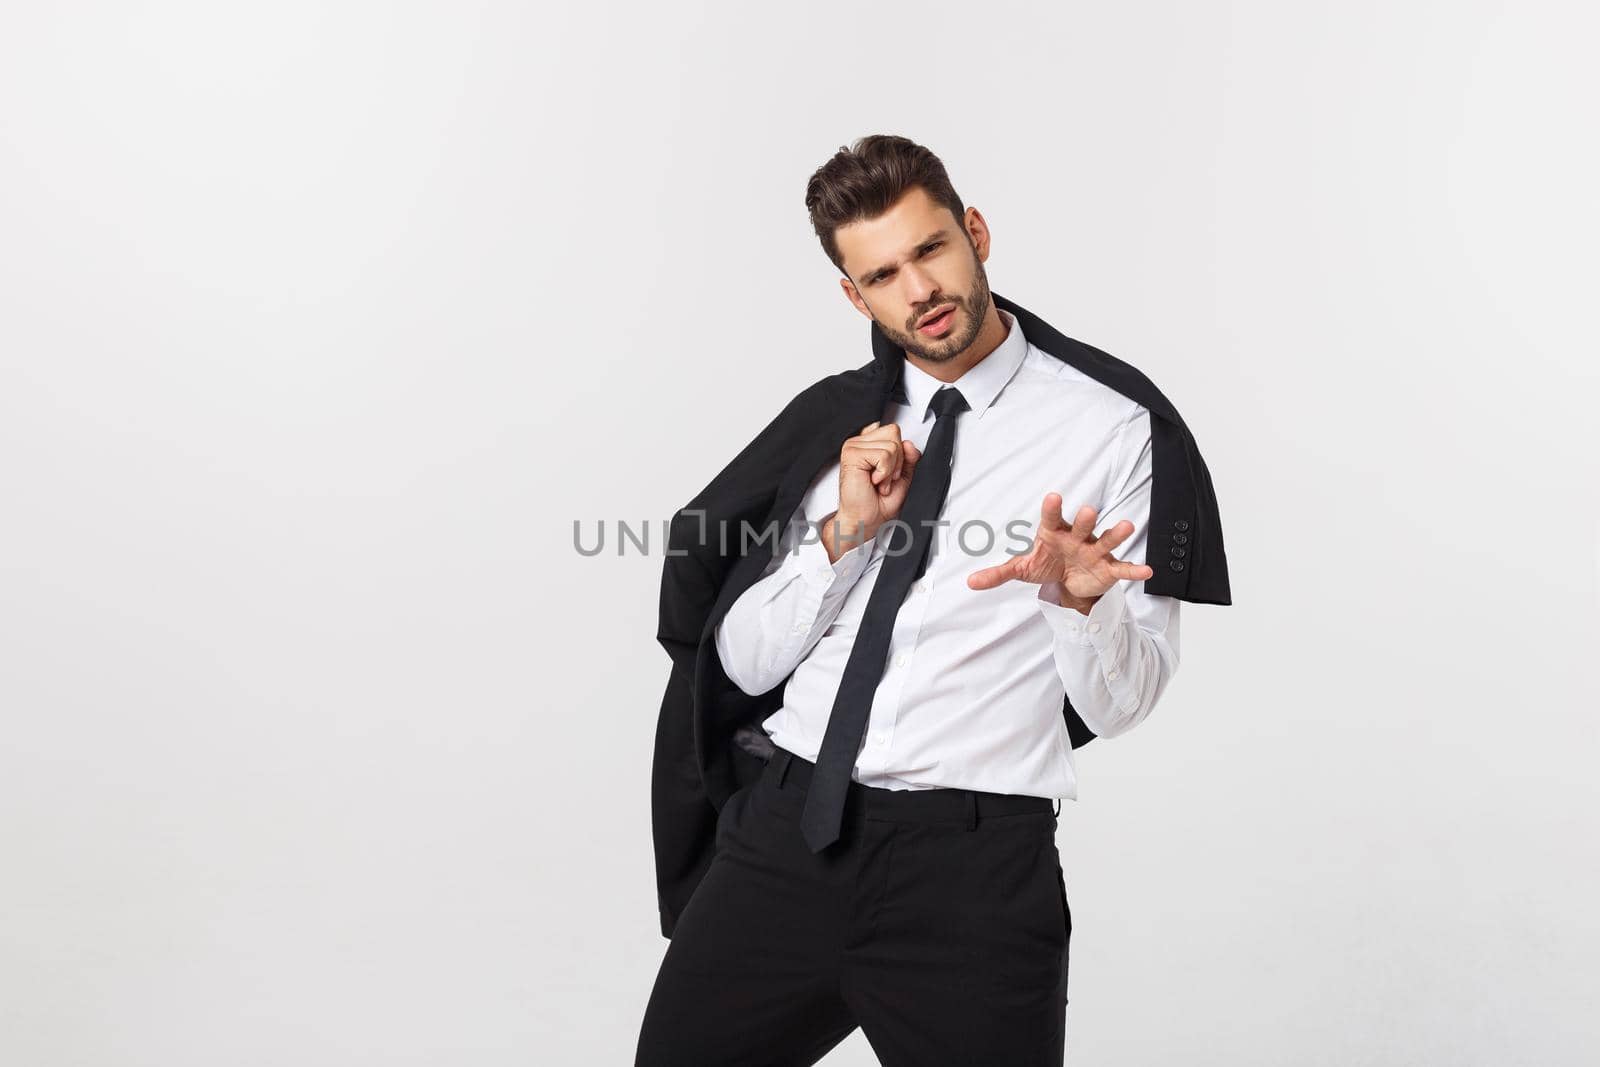 Portrait of confident handsome man holding his suit, isolated on white background.